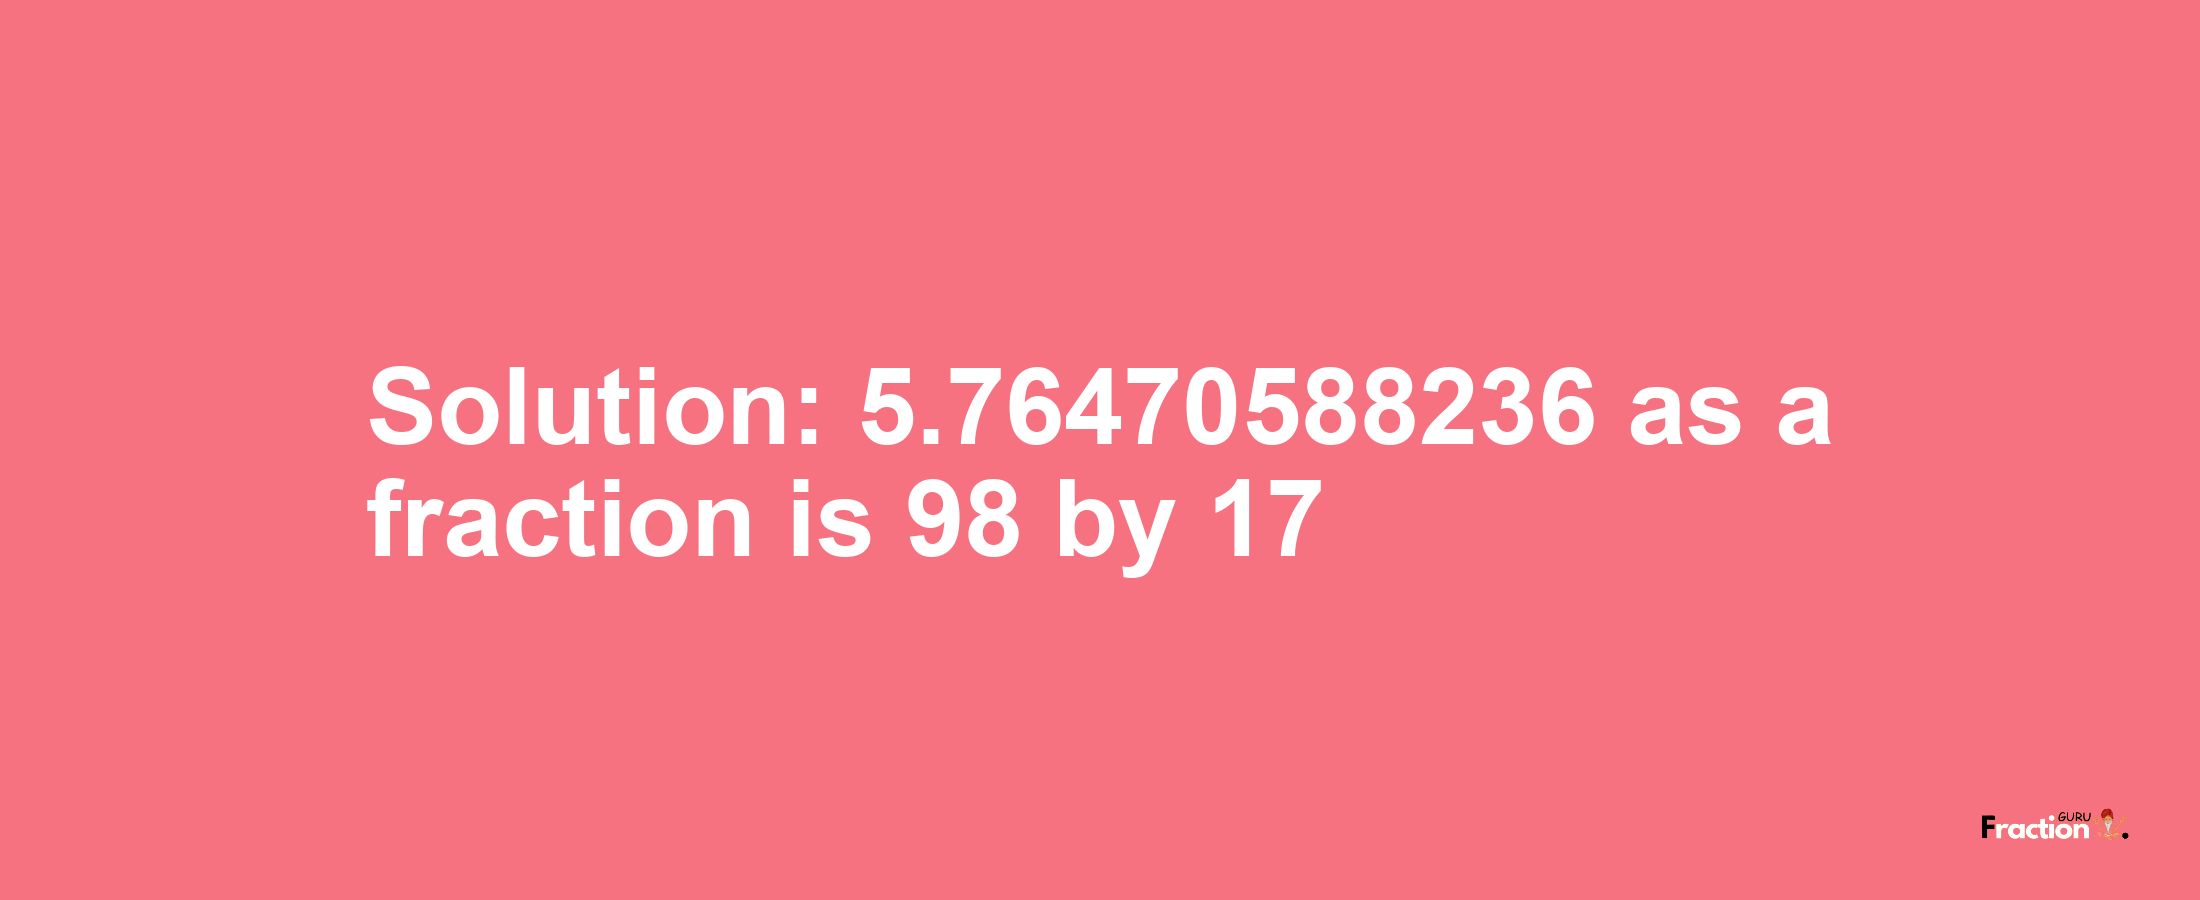 Solution:5.76470588236 as a fraction is 98/17